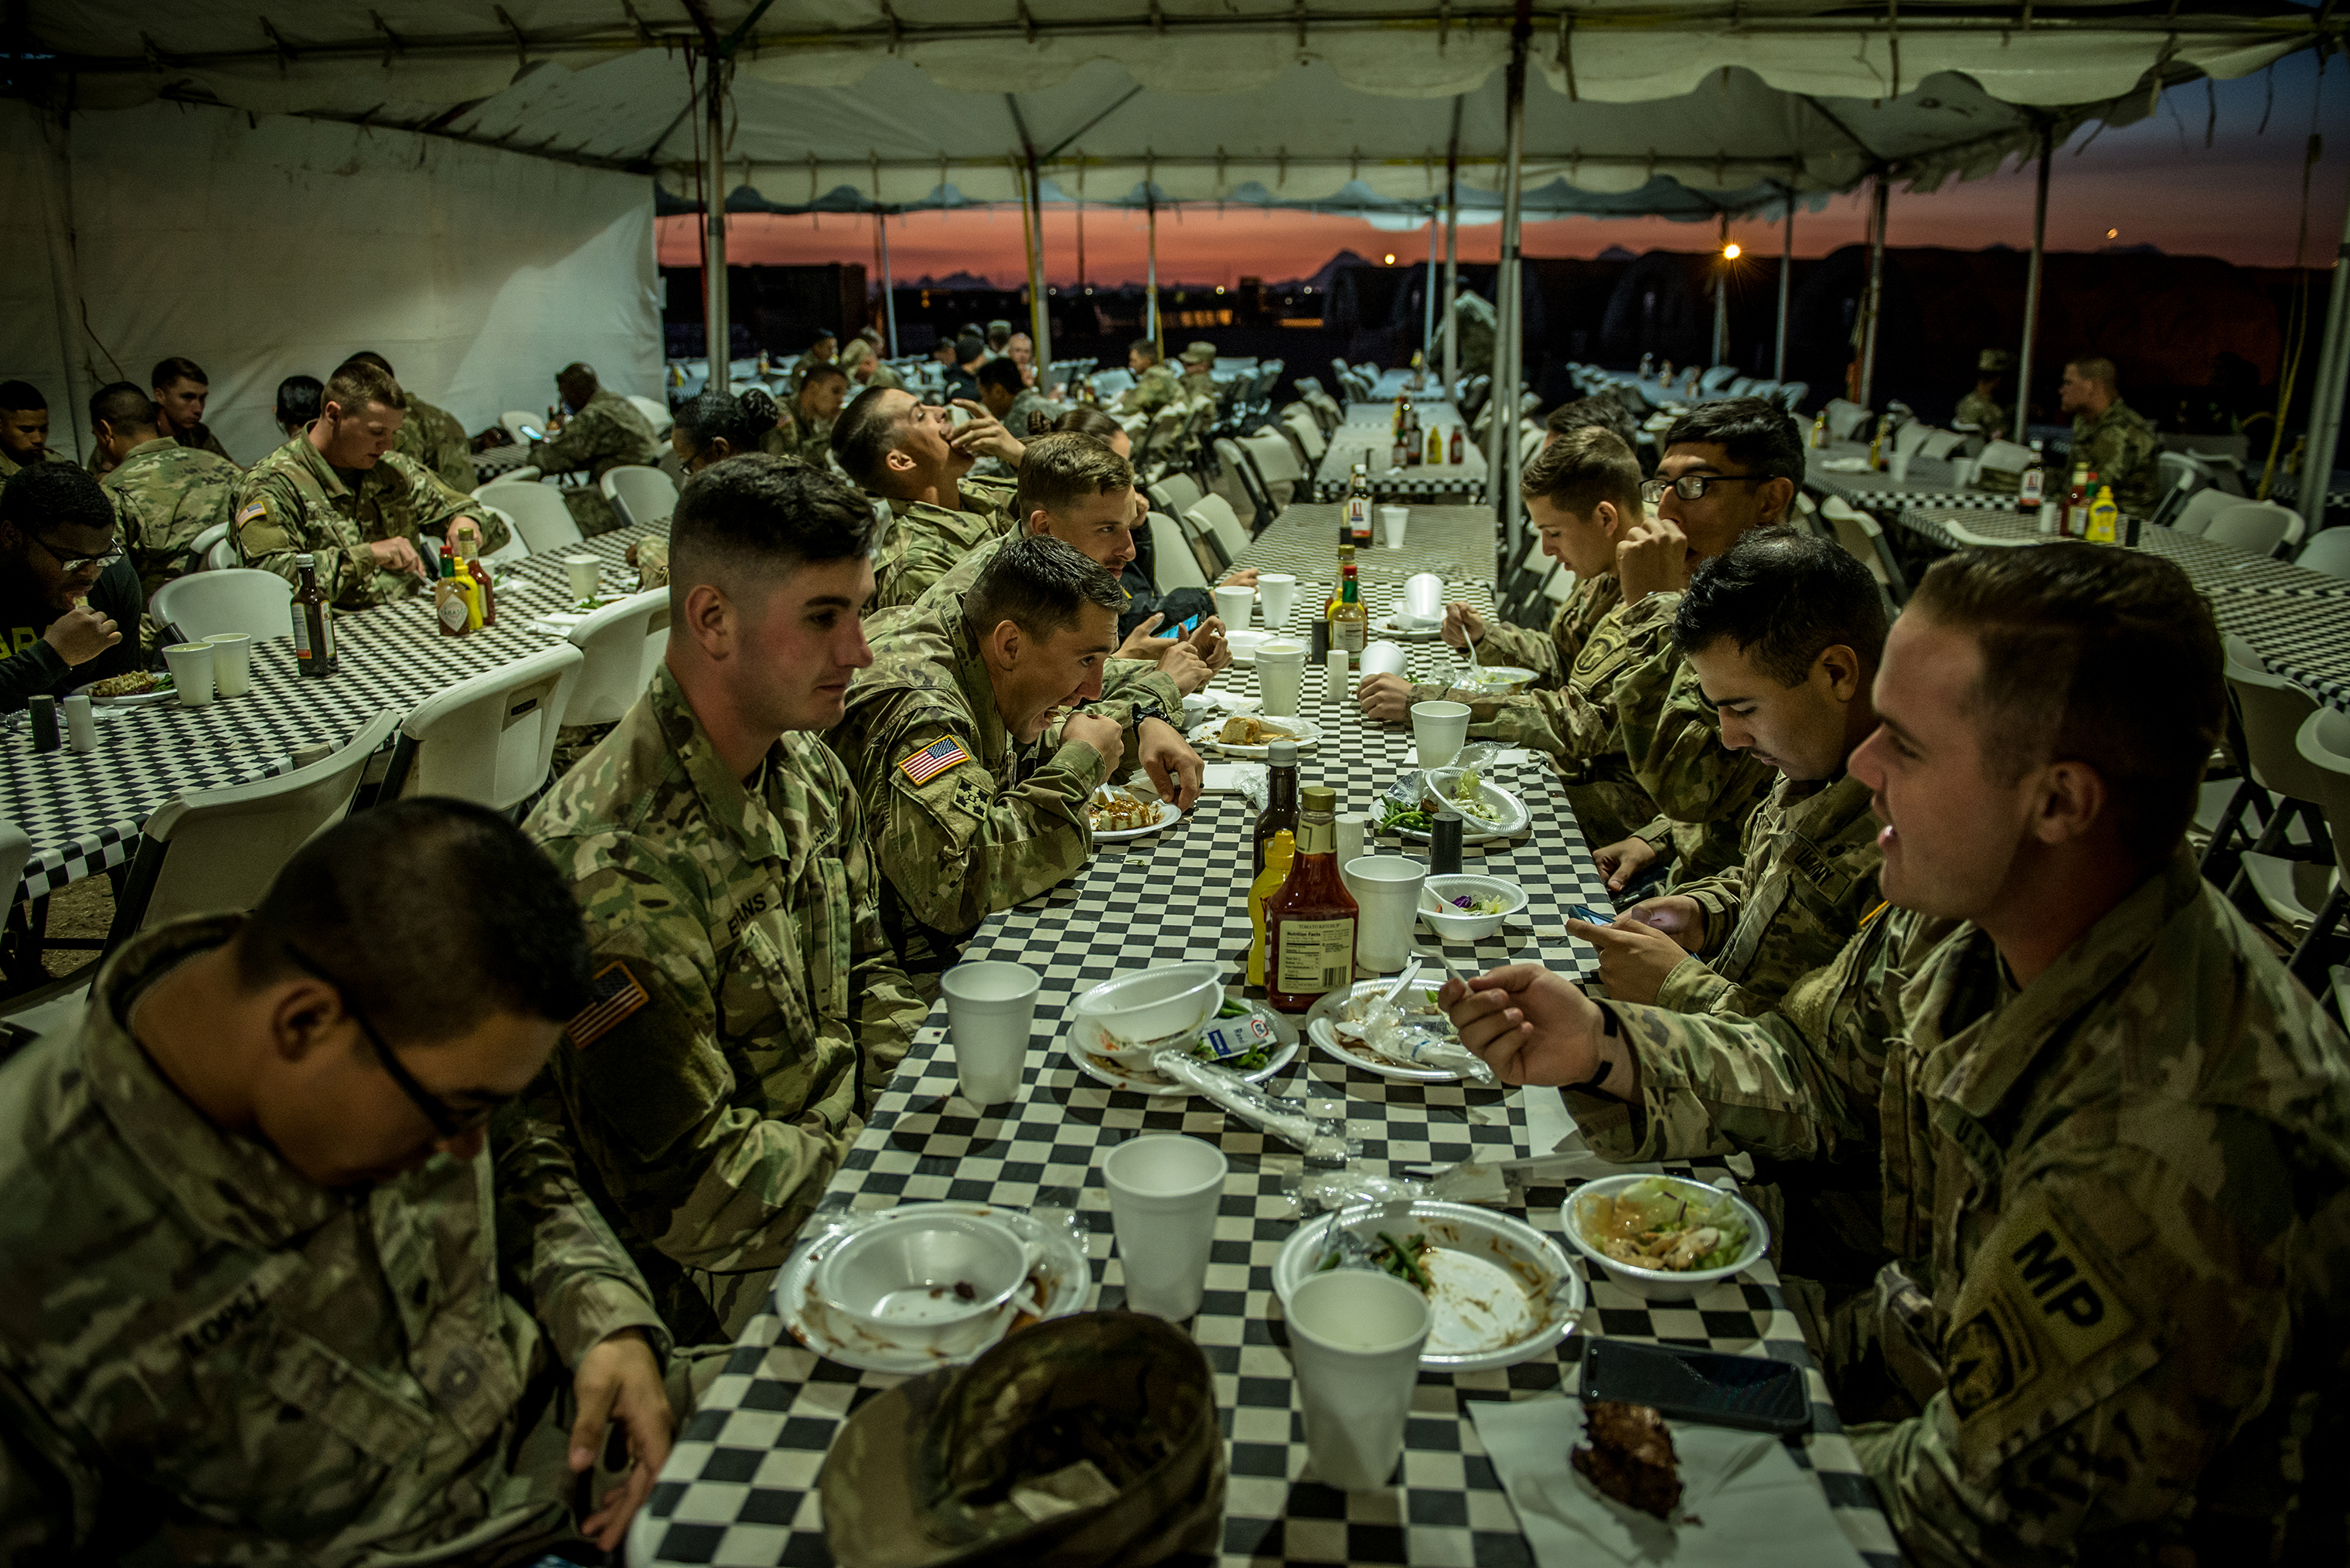 Soldiers eat dinner in the chow tent, where a Thanksgiving meal would be served, in Sunglow City, an outpost constructed in Tucson, Ariz. (Meridith Kohut for TIME)